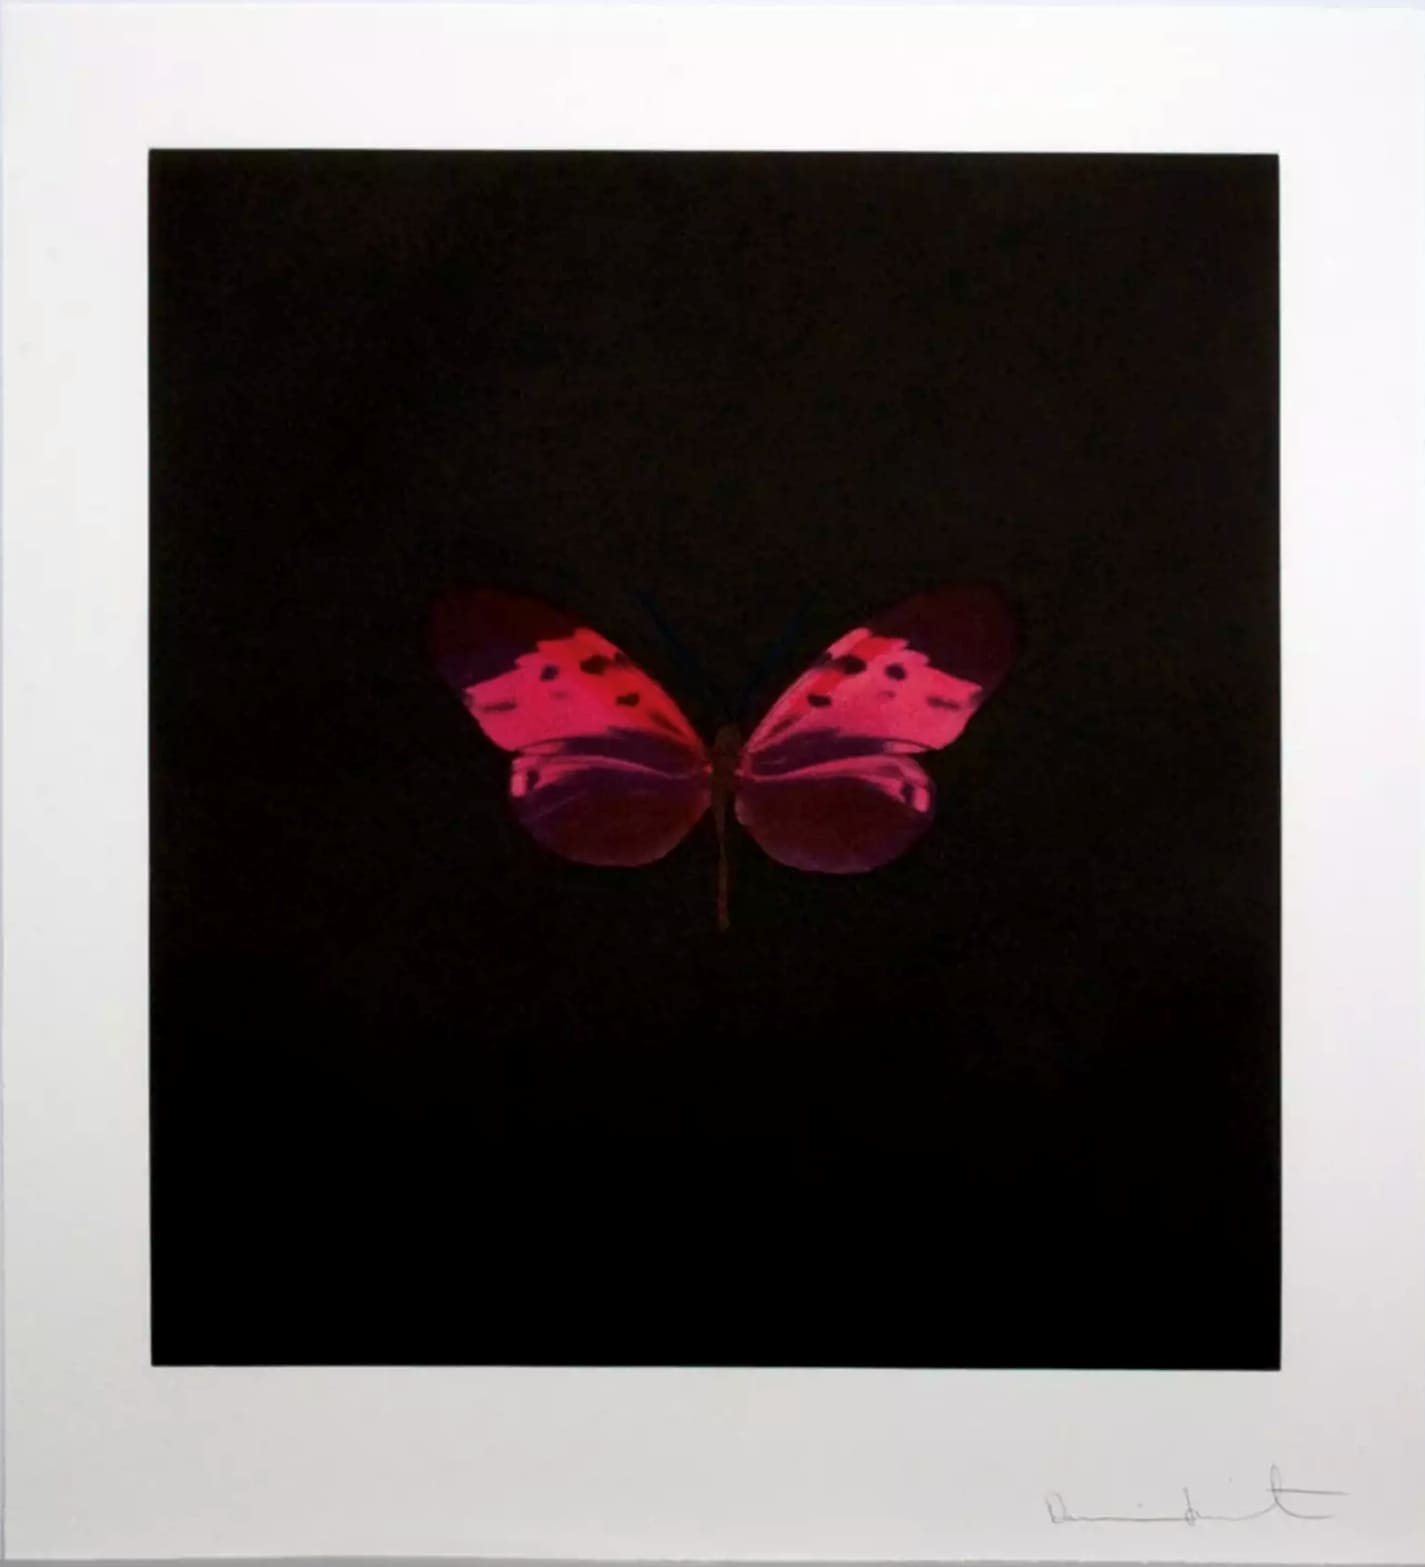 Damien Hirst, Pink Butterfly (Memento), 2008